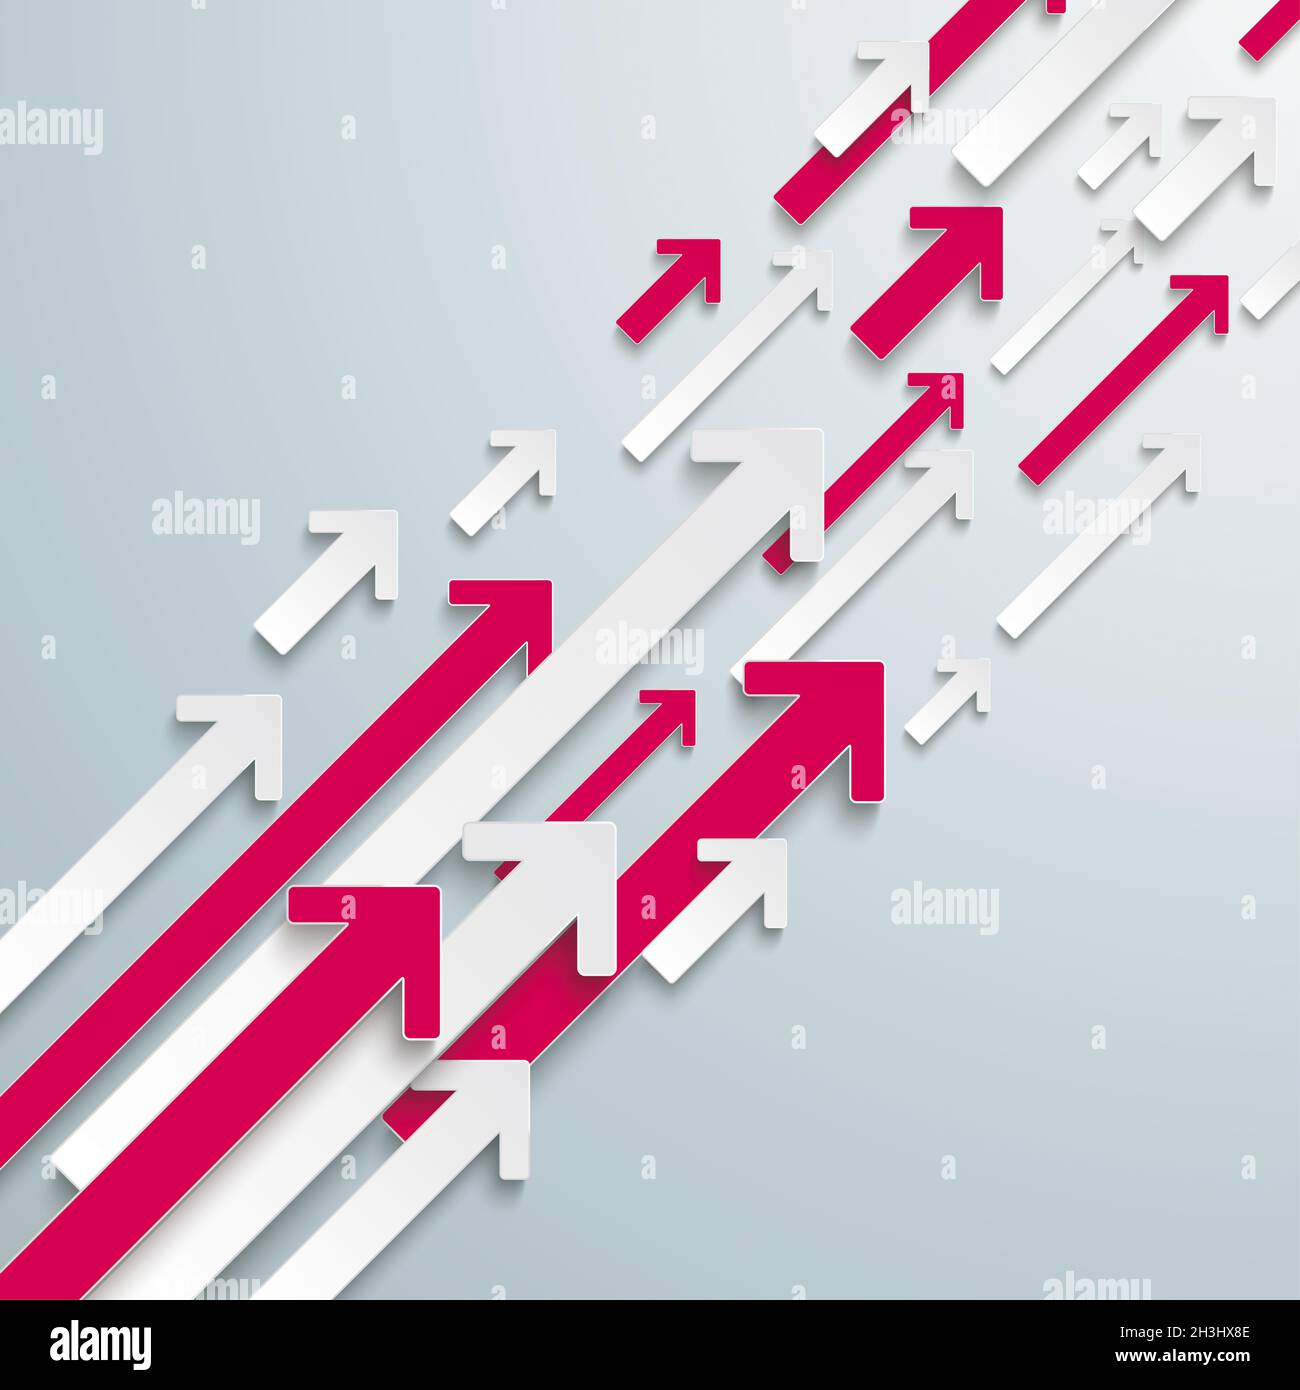 Arrows Up White Pink Bevel Growth PiAd Stock Photo